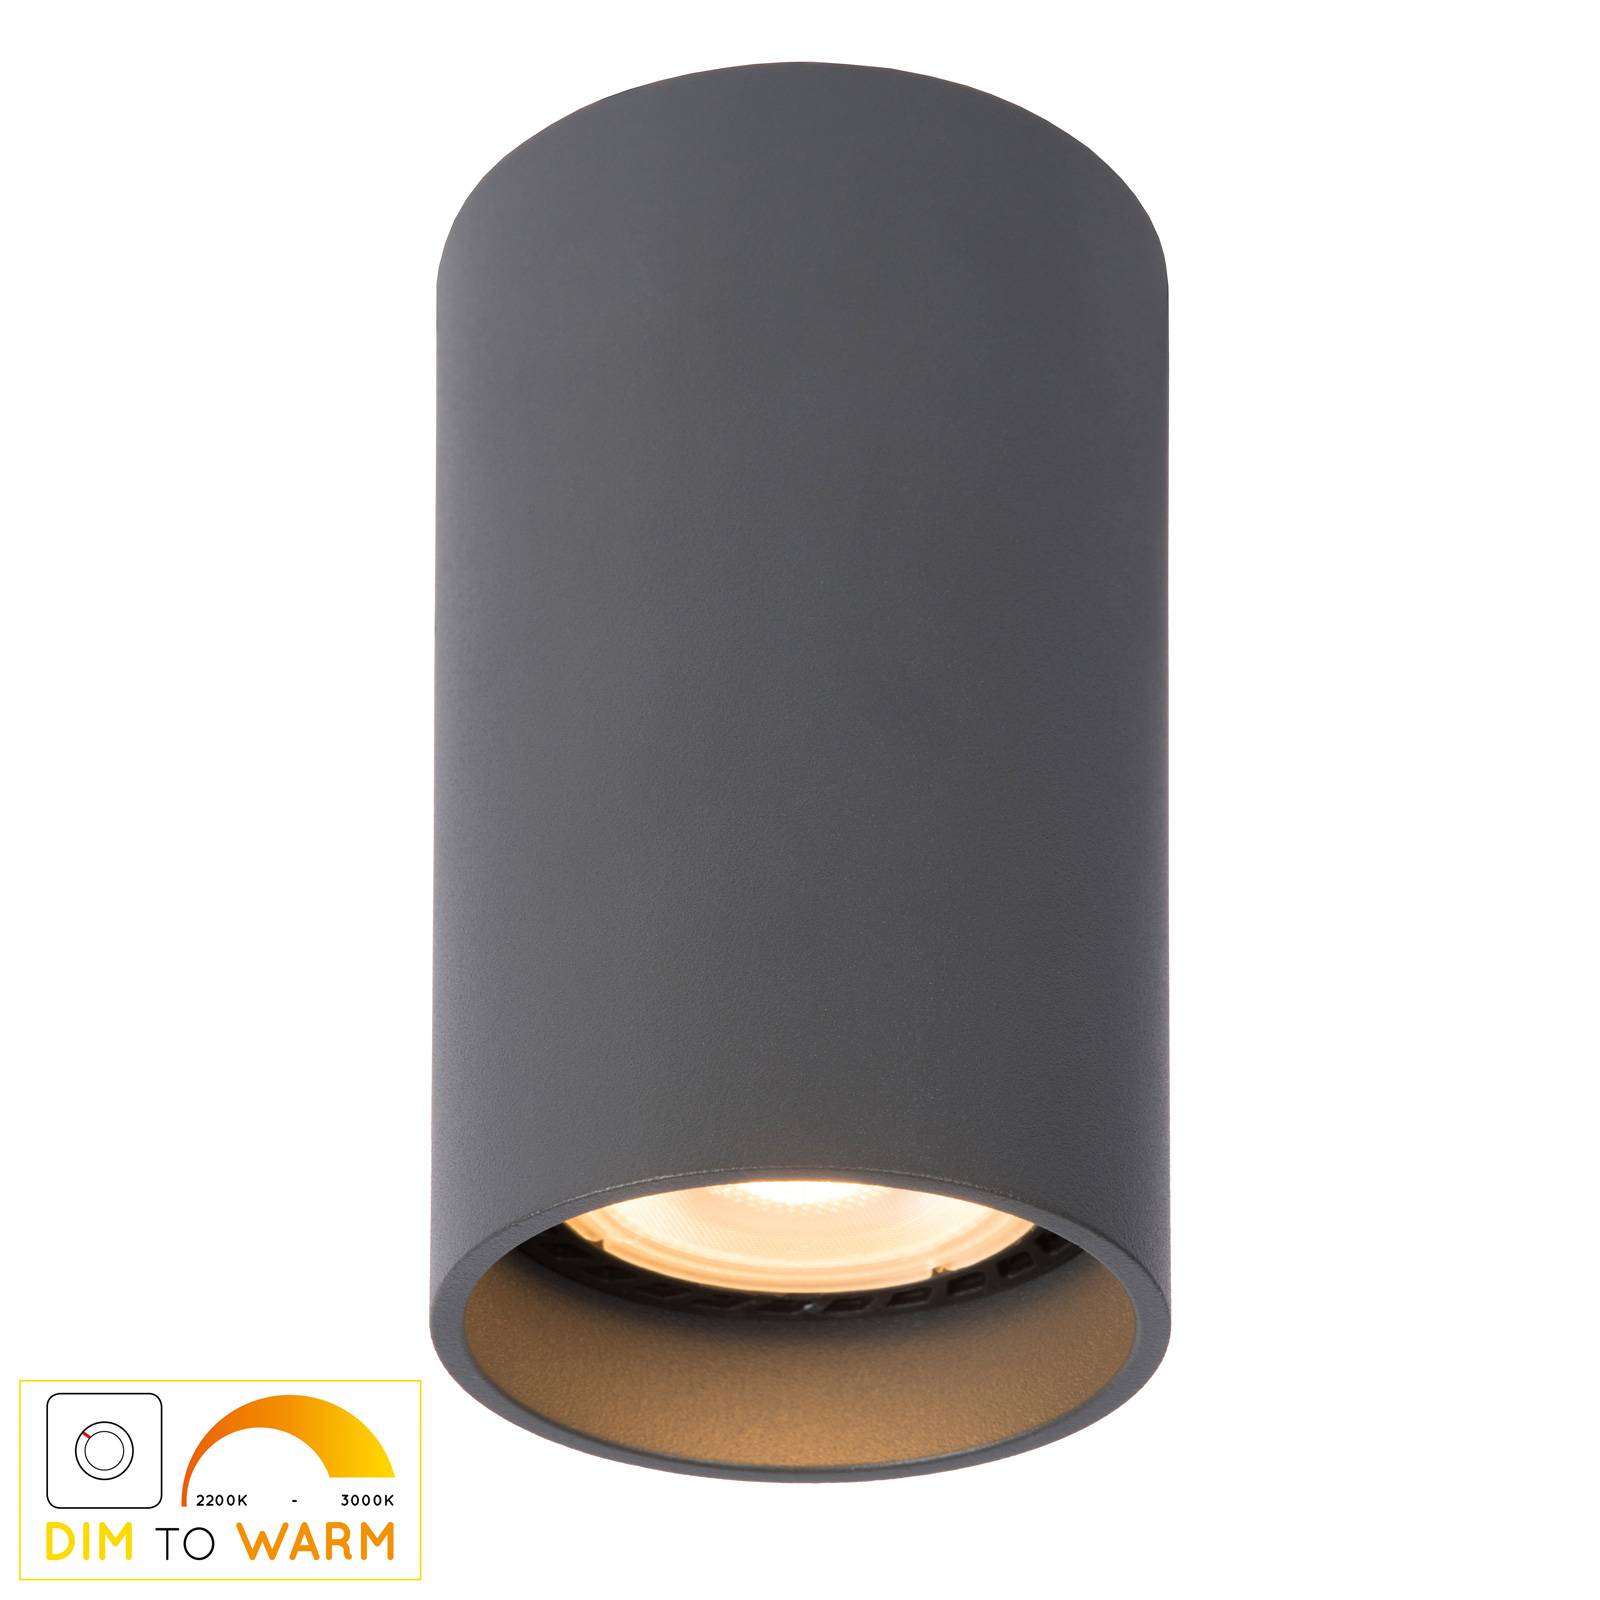 Photos - Chandelier / Lamp Lucide Dime LED ceiling light Delto dimmable to warm, round, grey 